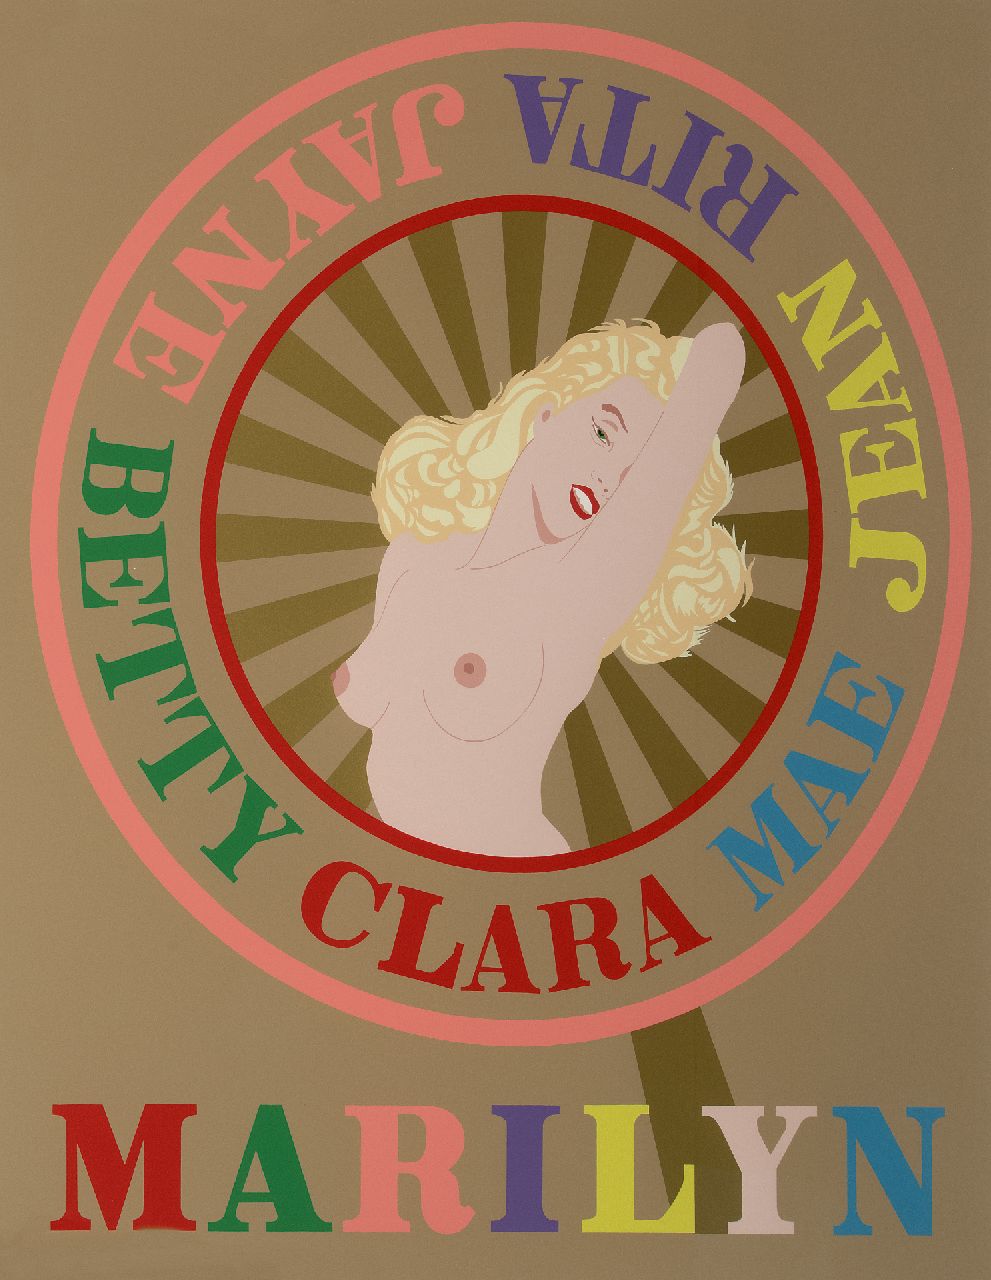 Indiana (Robert Clark) R.  | Robert Indiana (Robert Clark) | Prints and Multiples offered for sale | Sunburst Marilyn (Homage to Marilyn Monroe), screenprint on paper 85.0 x 71.5 cm, signed l.r. (in pencil) and dated 2001 (in pencil)